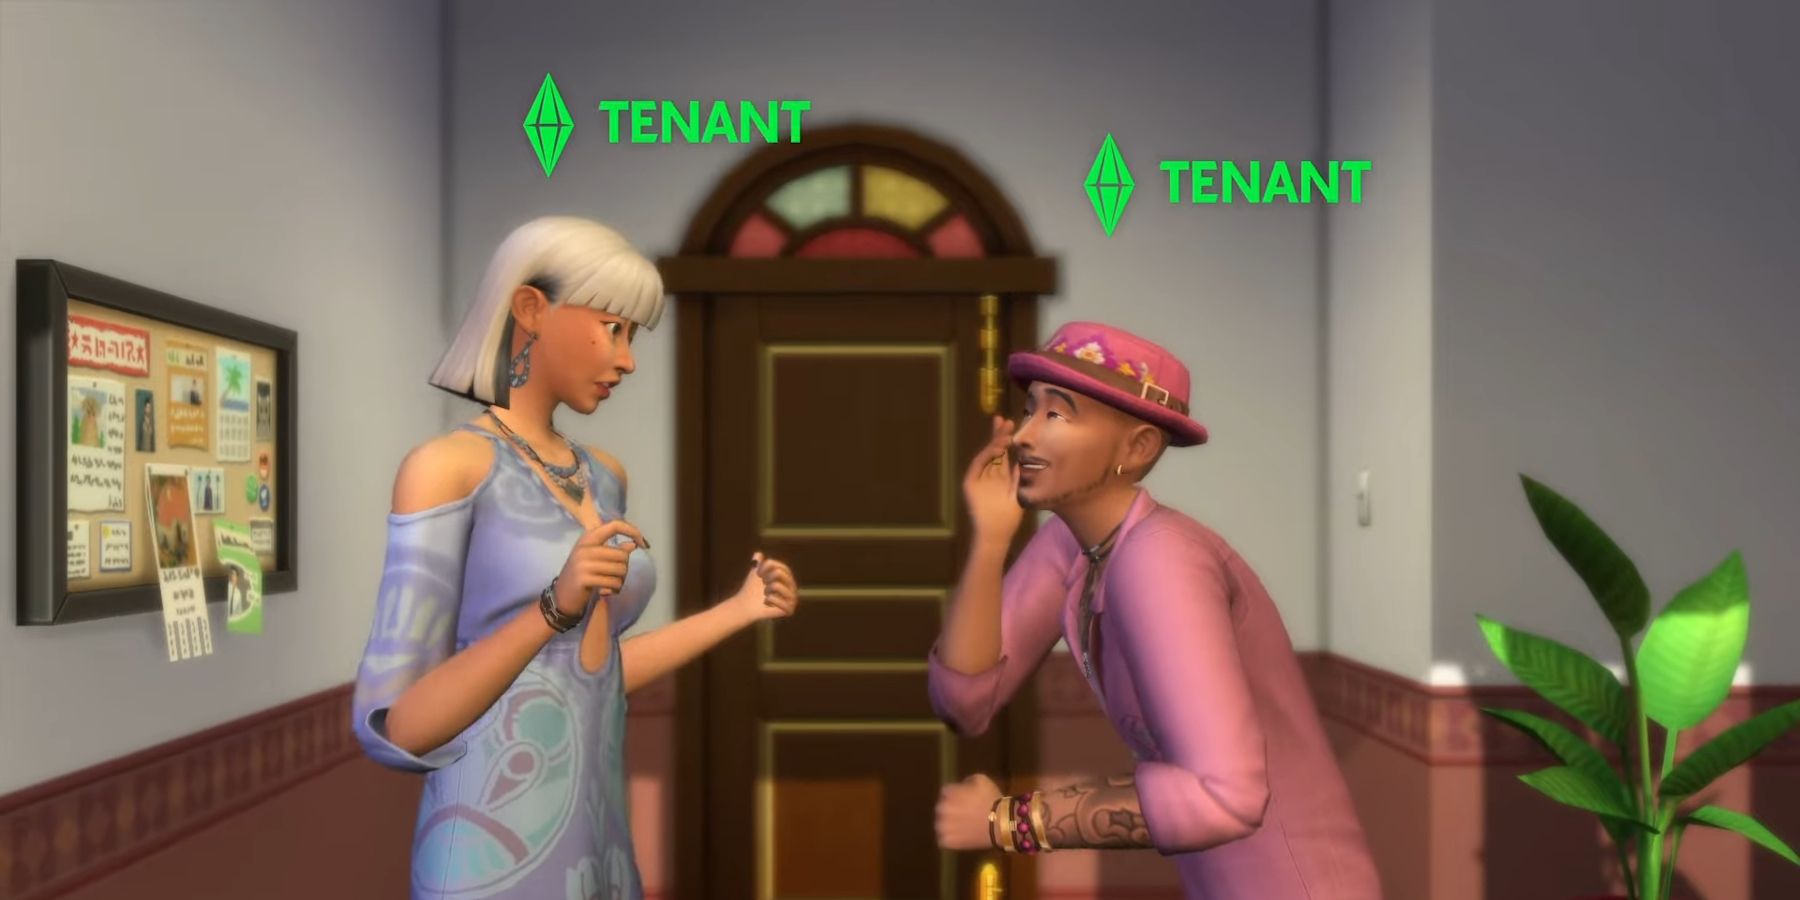 Sims 4 For Rent Expansion Pack: Release Date, Price & Gameplay - IMDb